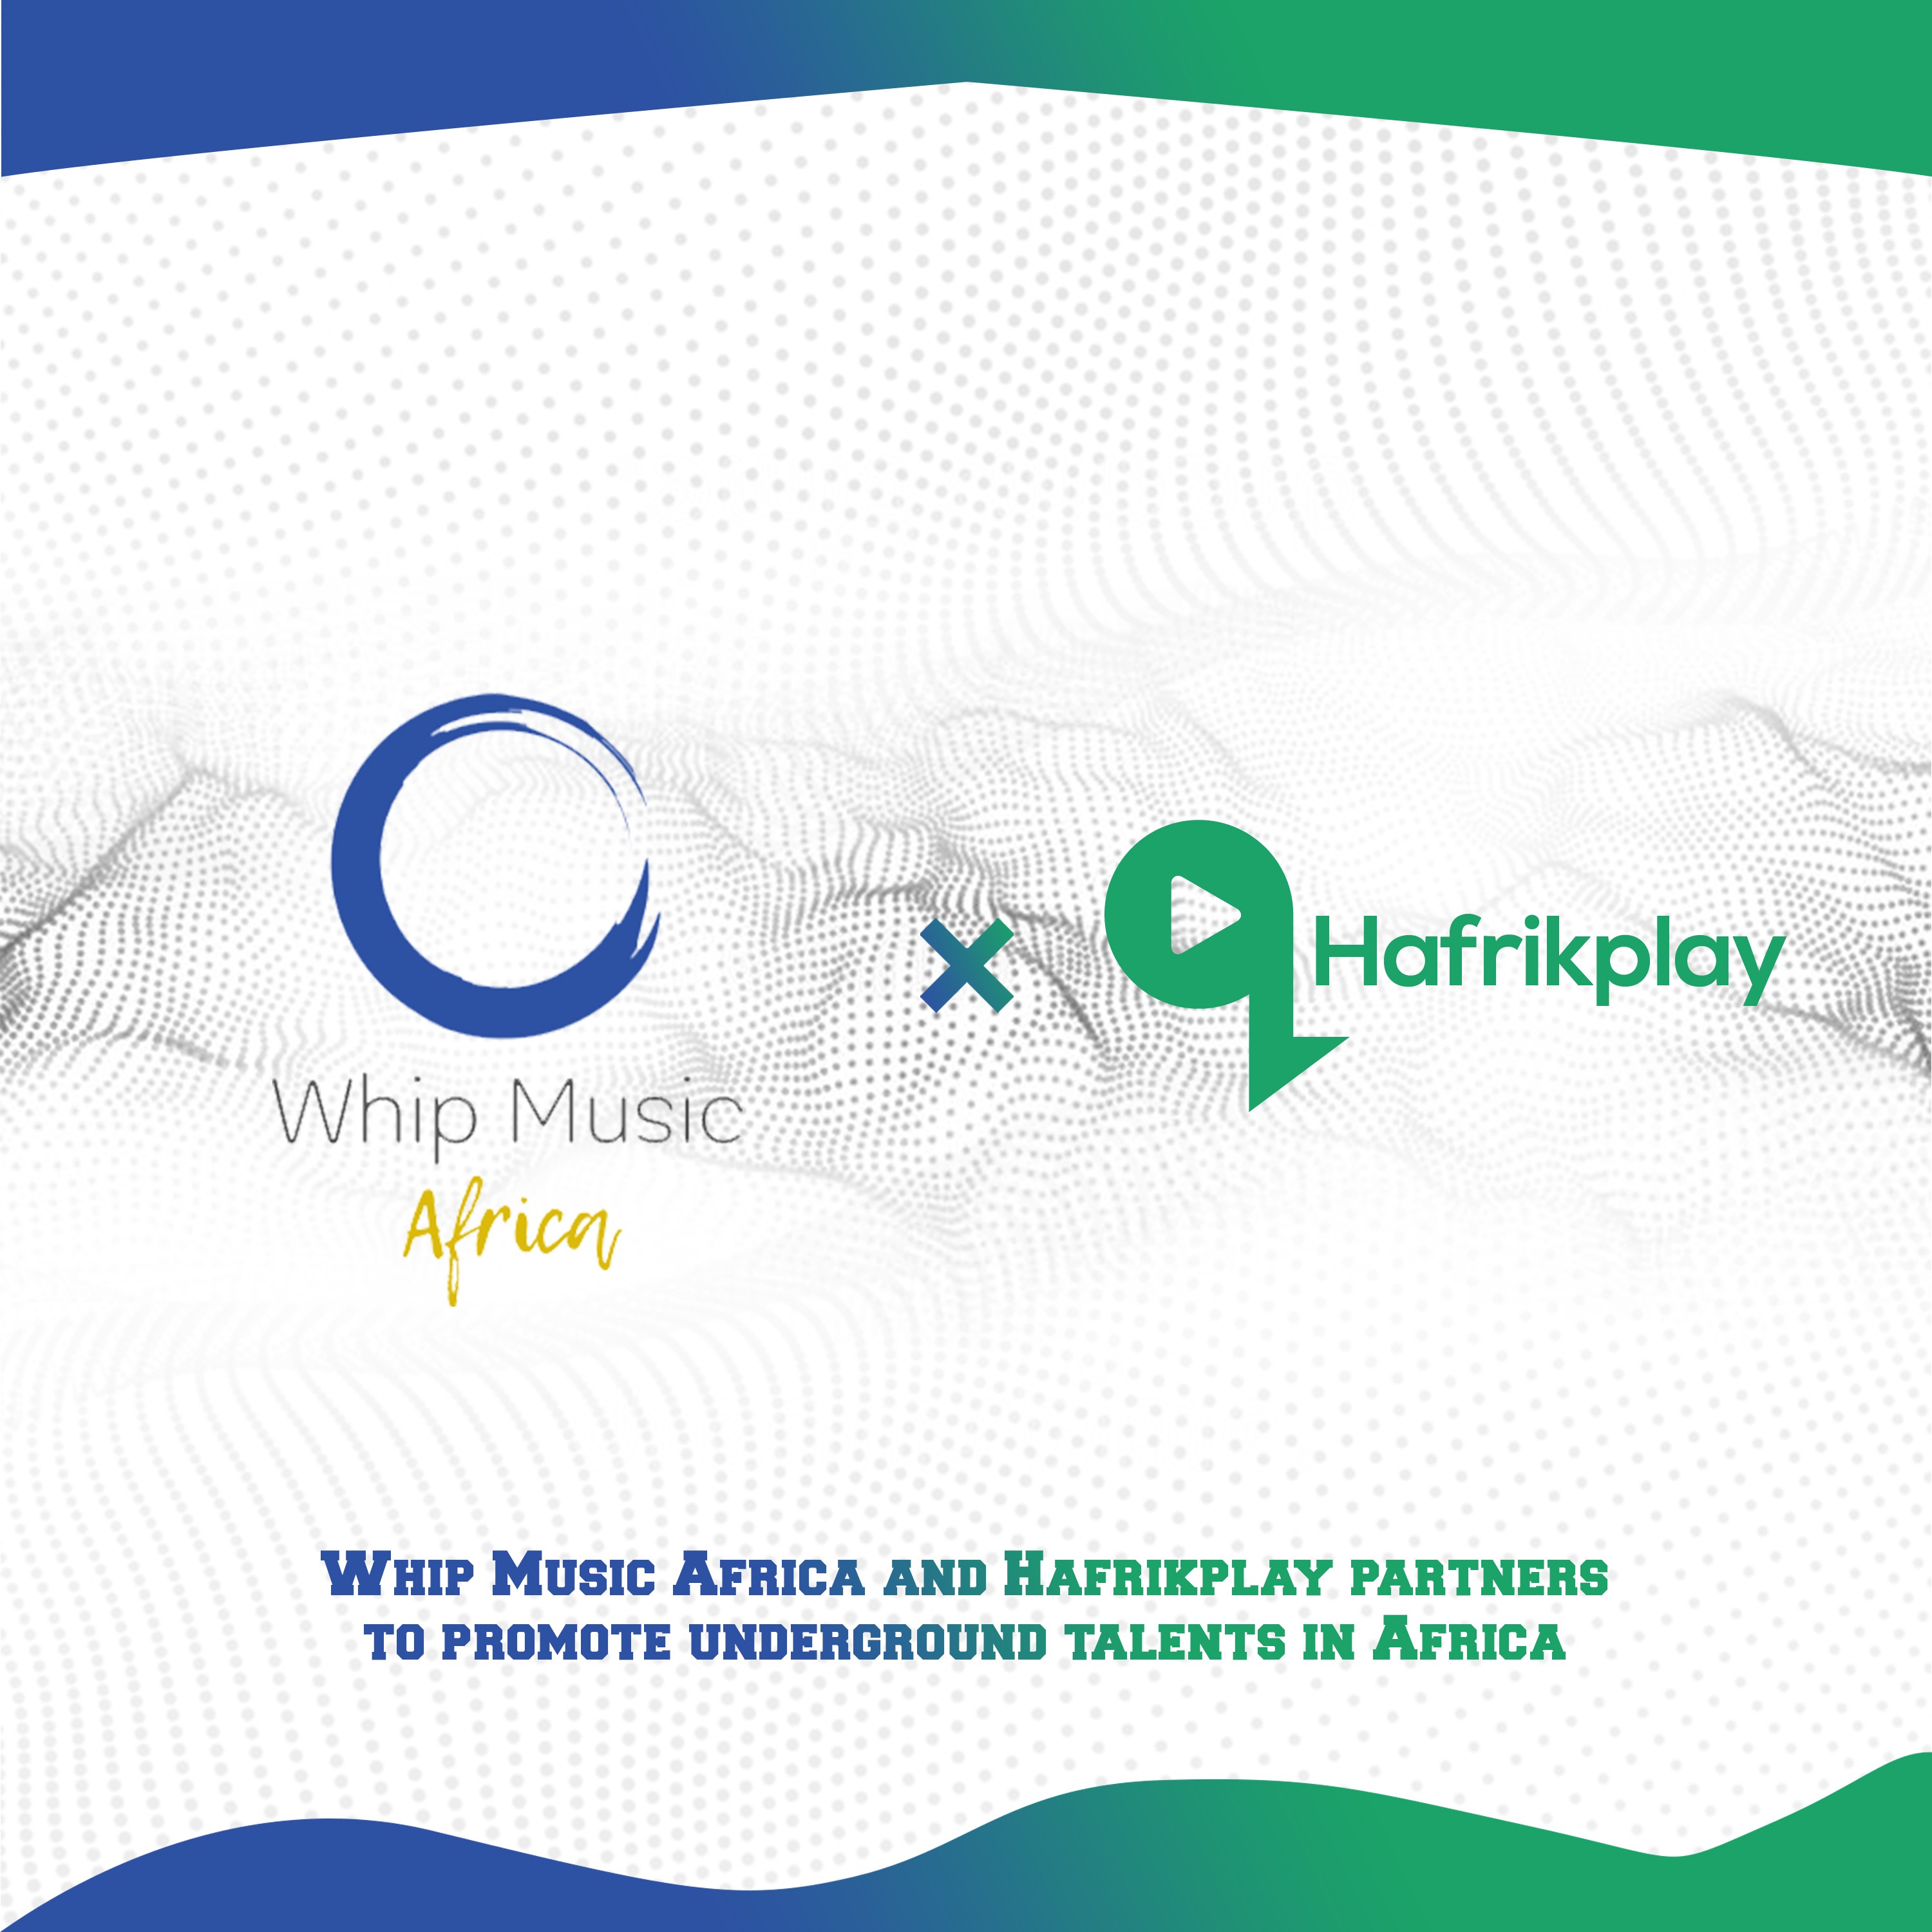 Hafrikplay & Whip Music Africa partner to promote underground talent in Africa